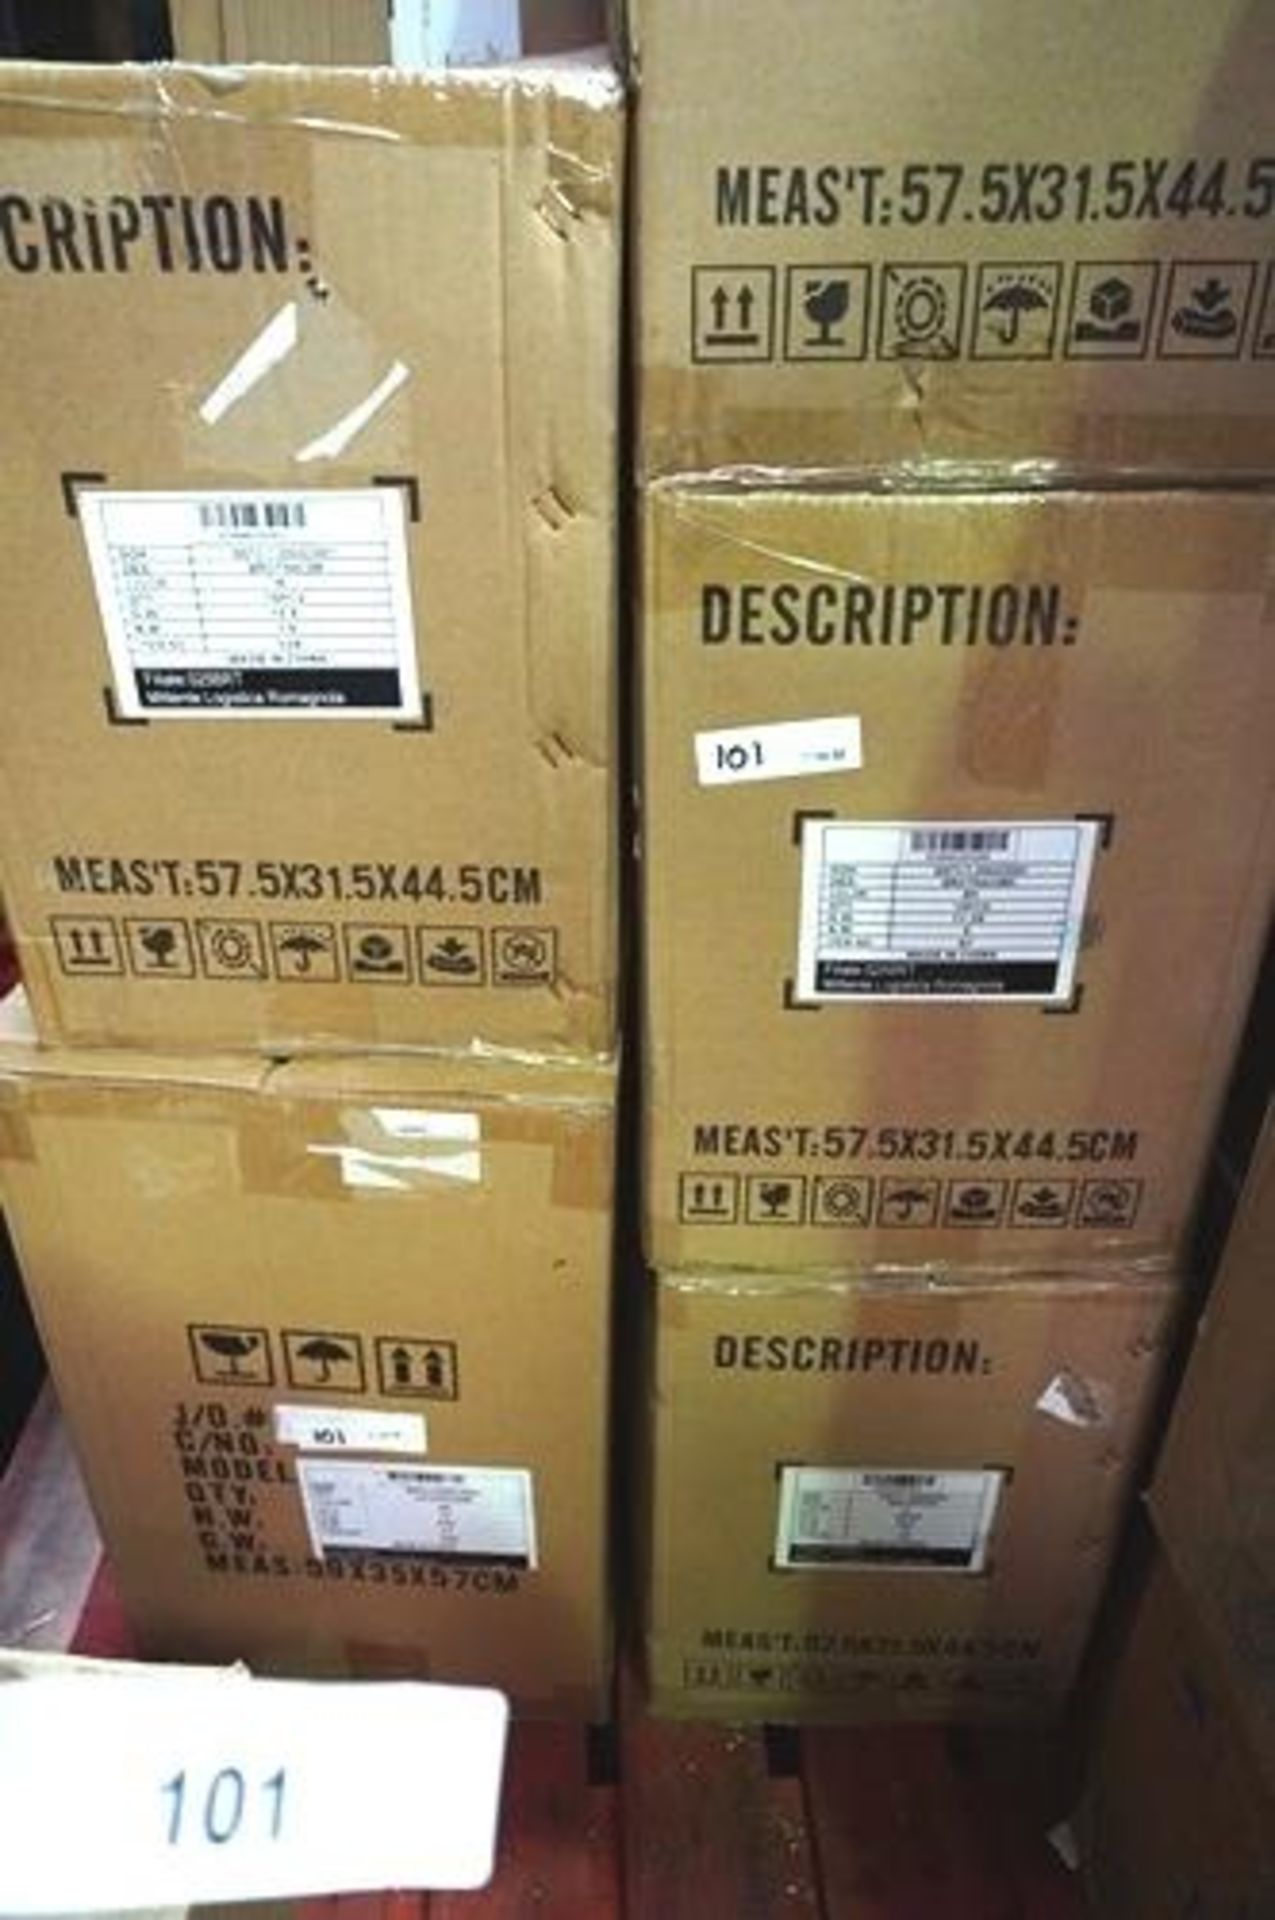 2 x boxes of 15 ProPart toner cartridges, codes KYOTK1150 and KYOTK1160, together with 2 x boxes